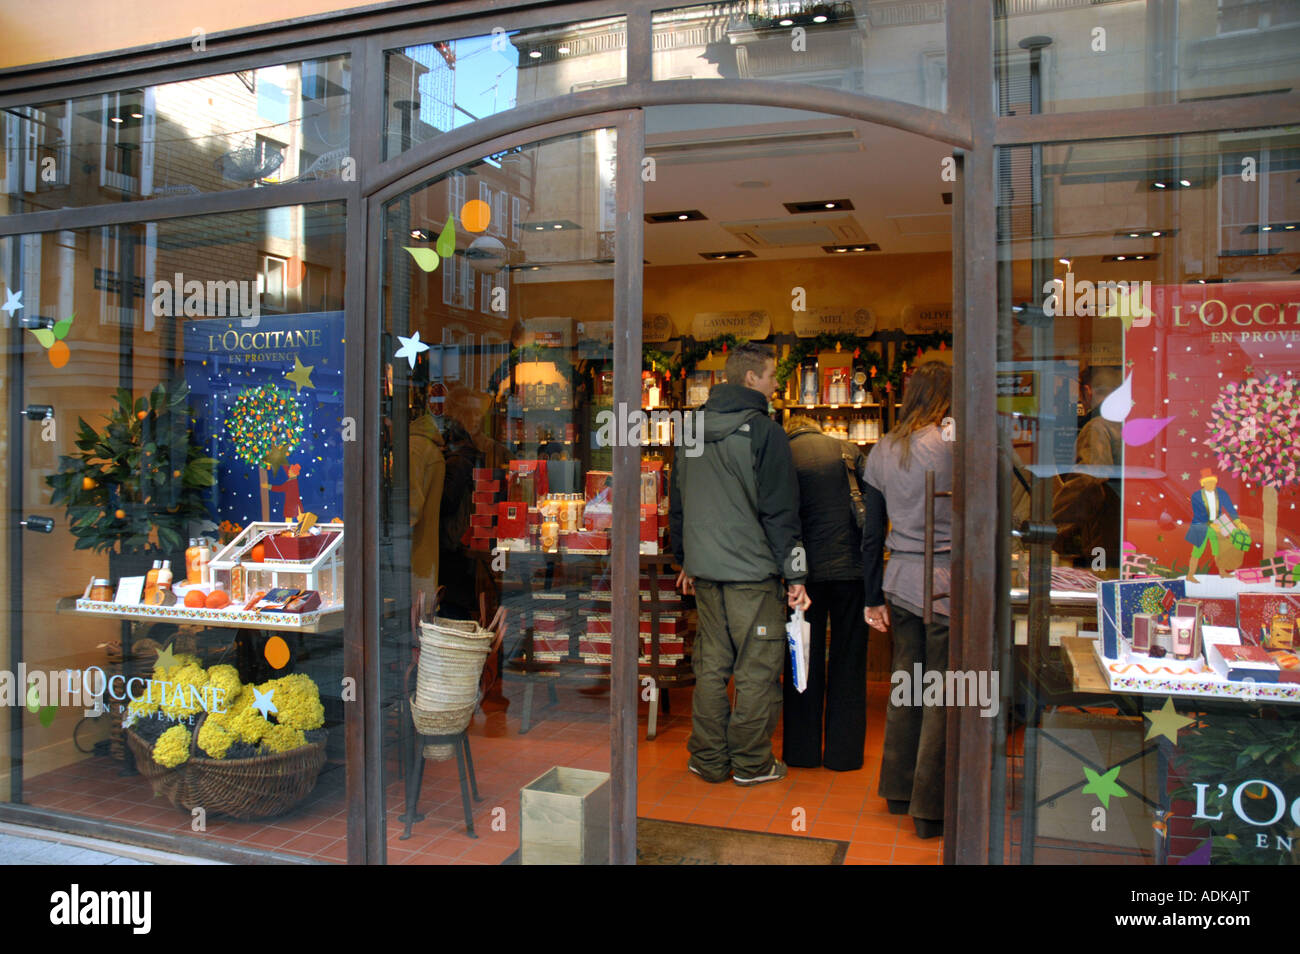 Shoppers inside French Parfumerie 'L'Ocittane', Shop in Caen, Normandy, France. December 2006. Stock Photo